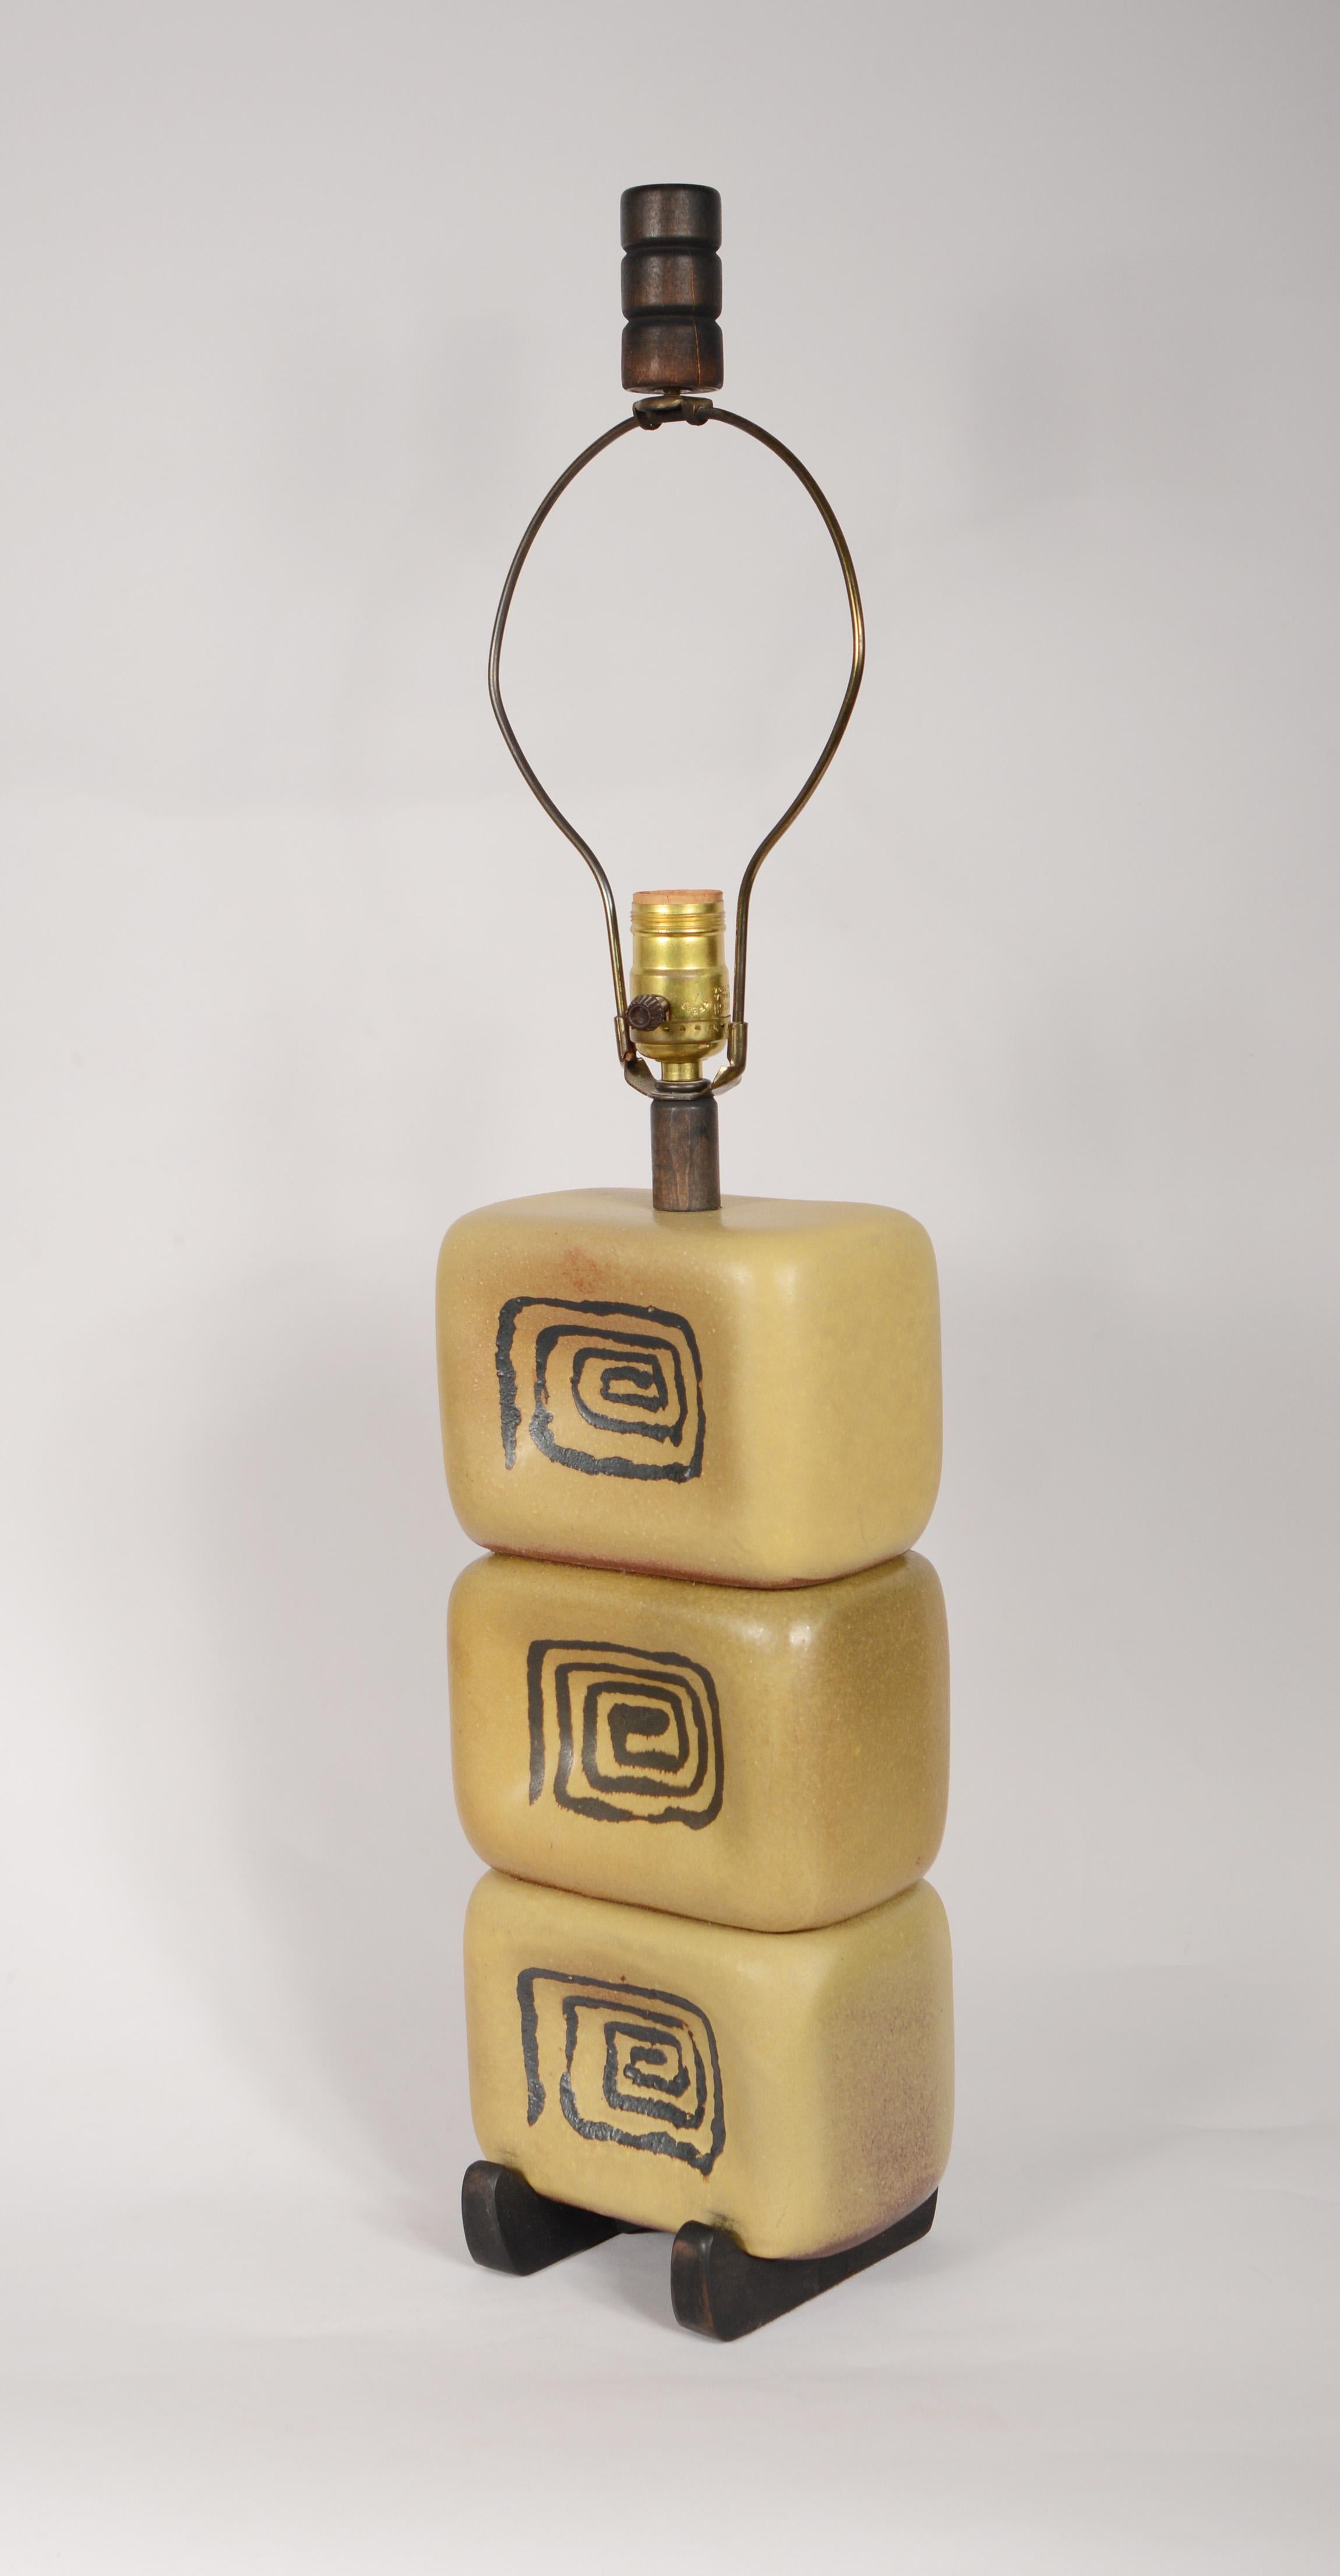 Ceramic table lamp by Gordon Martz. This lamp has his G/W signature incised on the bottom and is dated 1951. Gordon Martz and Jane Marshall married in 1951 right after graduating from Alfred University. They then went to work for Jane's parents